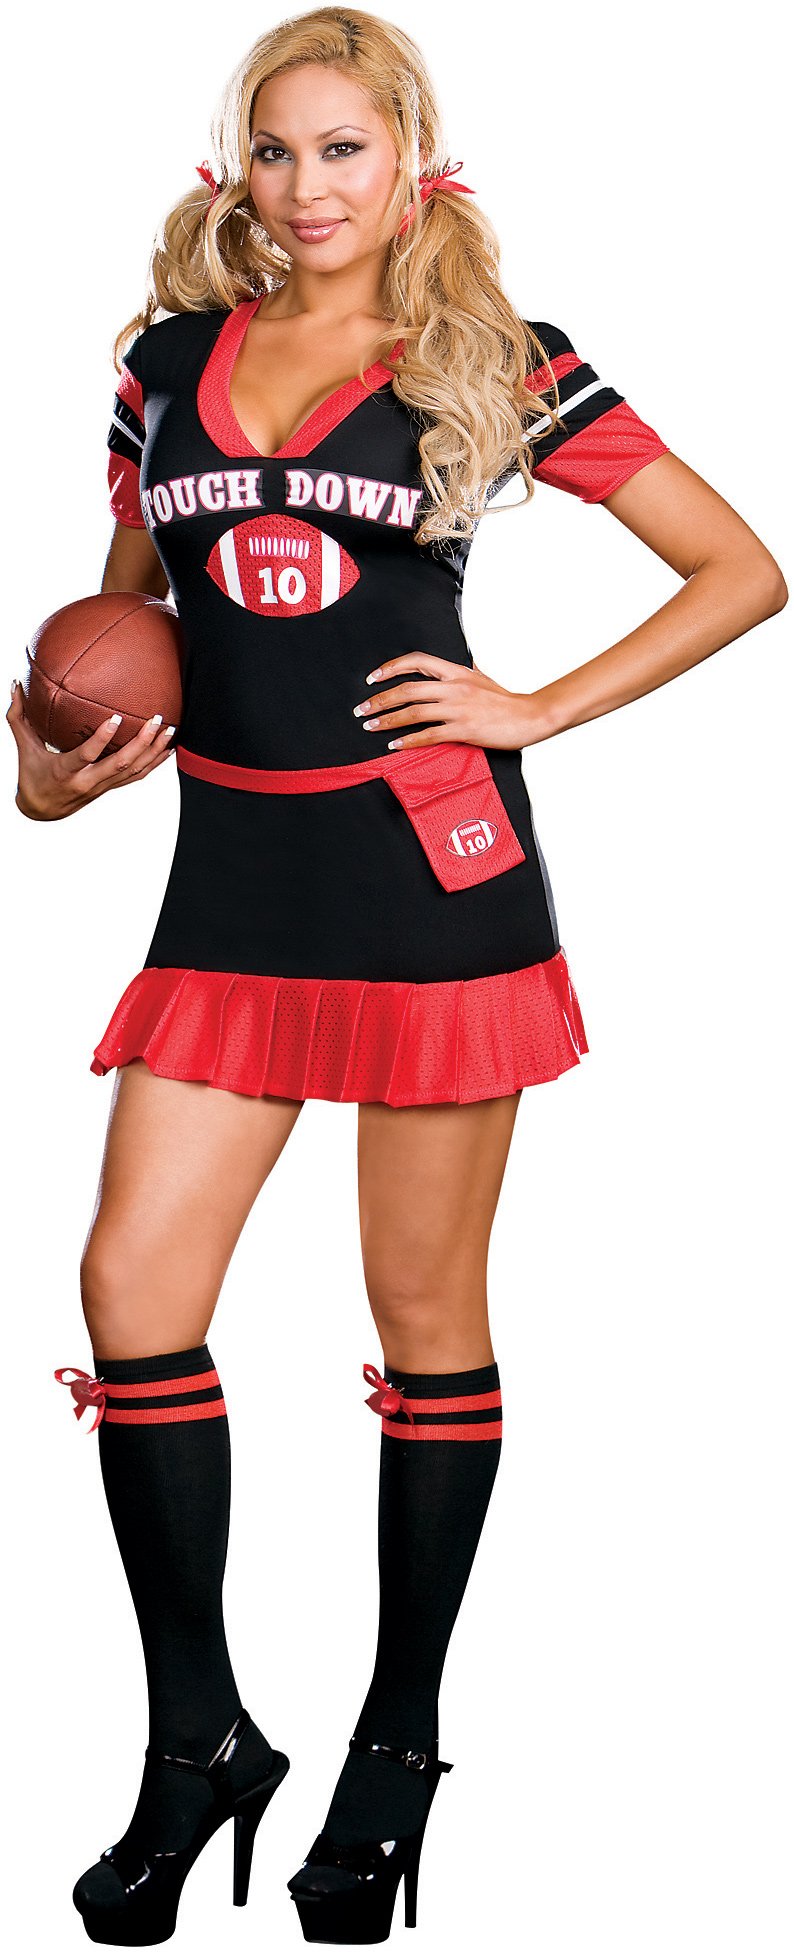 Touch Down Adult Plus Costume